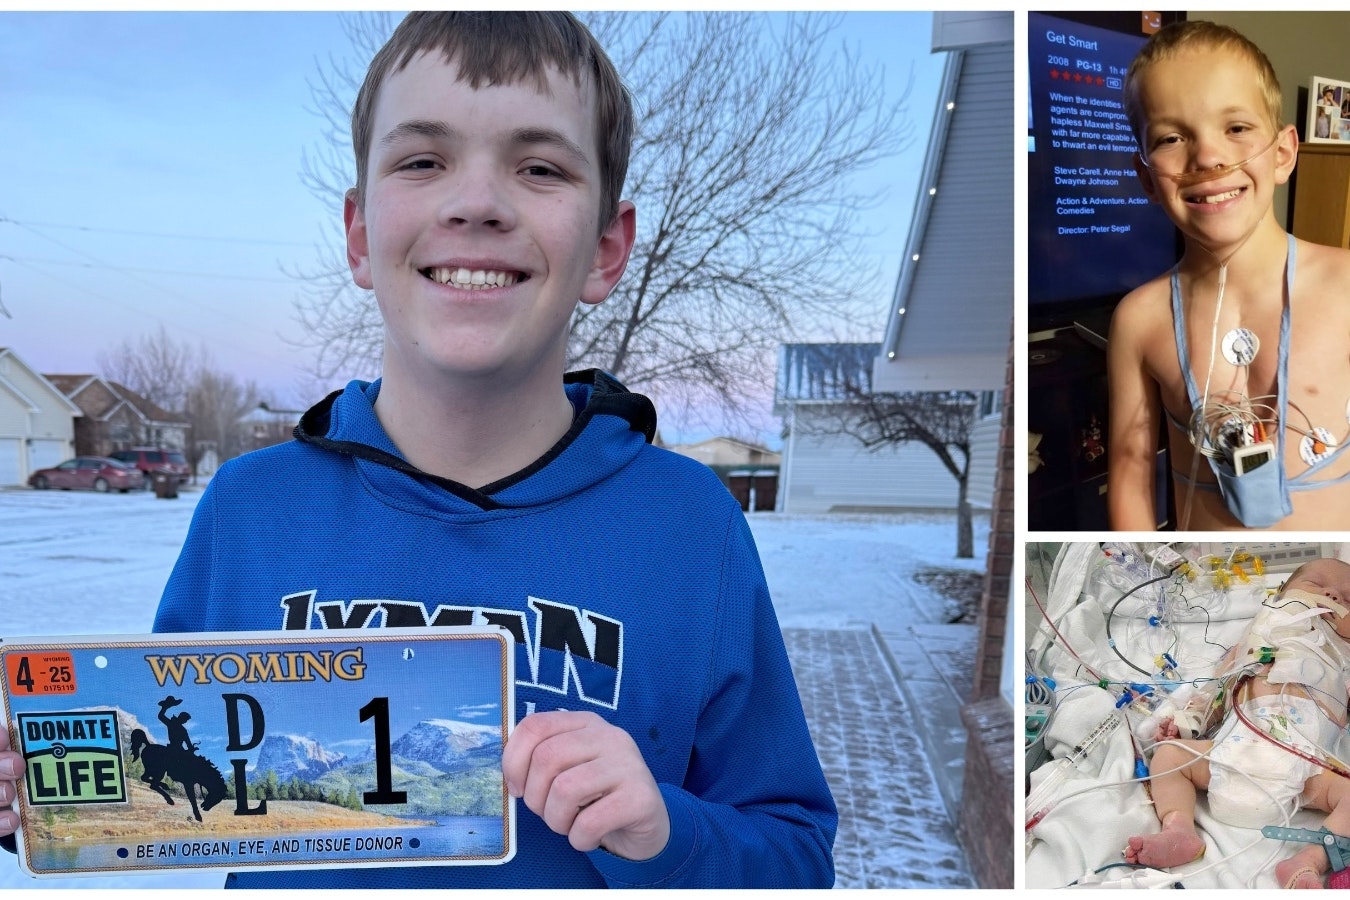 Bryson Quinney, who received a heart transplant in 2020, is pictured with the new Donate Life license plate, which became available in Wyoming on Jan. 1. He was born with half a heart and had several surgeries early in life, including a heart transplant.